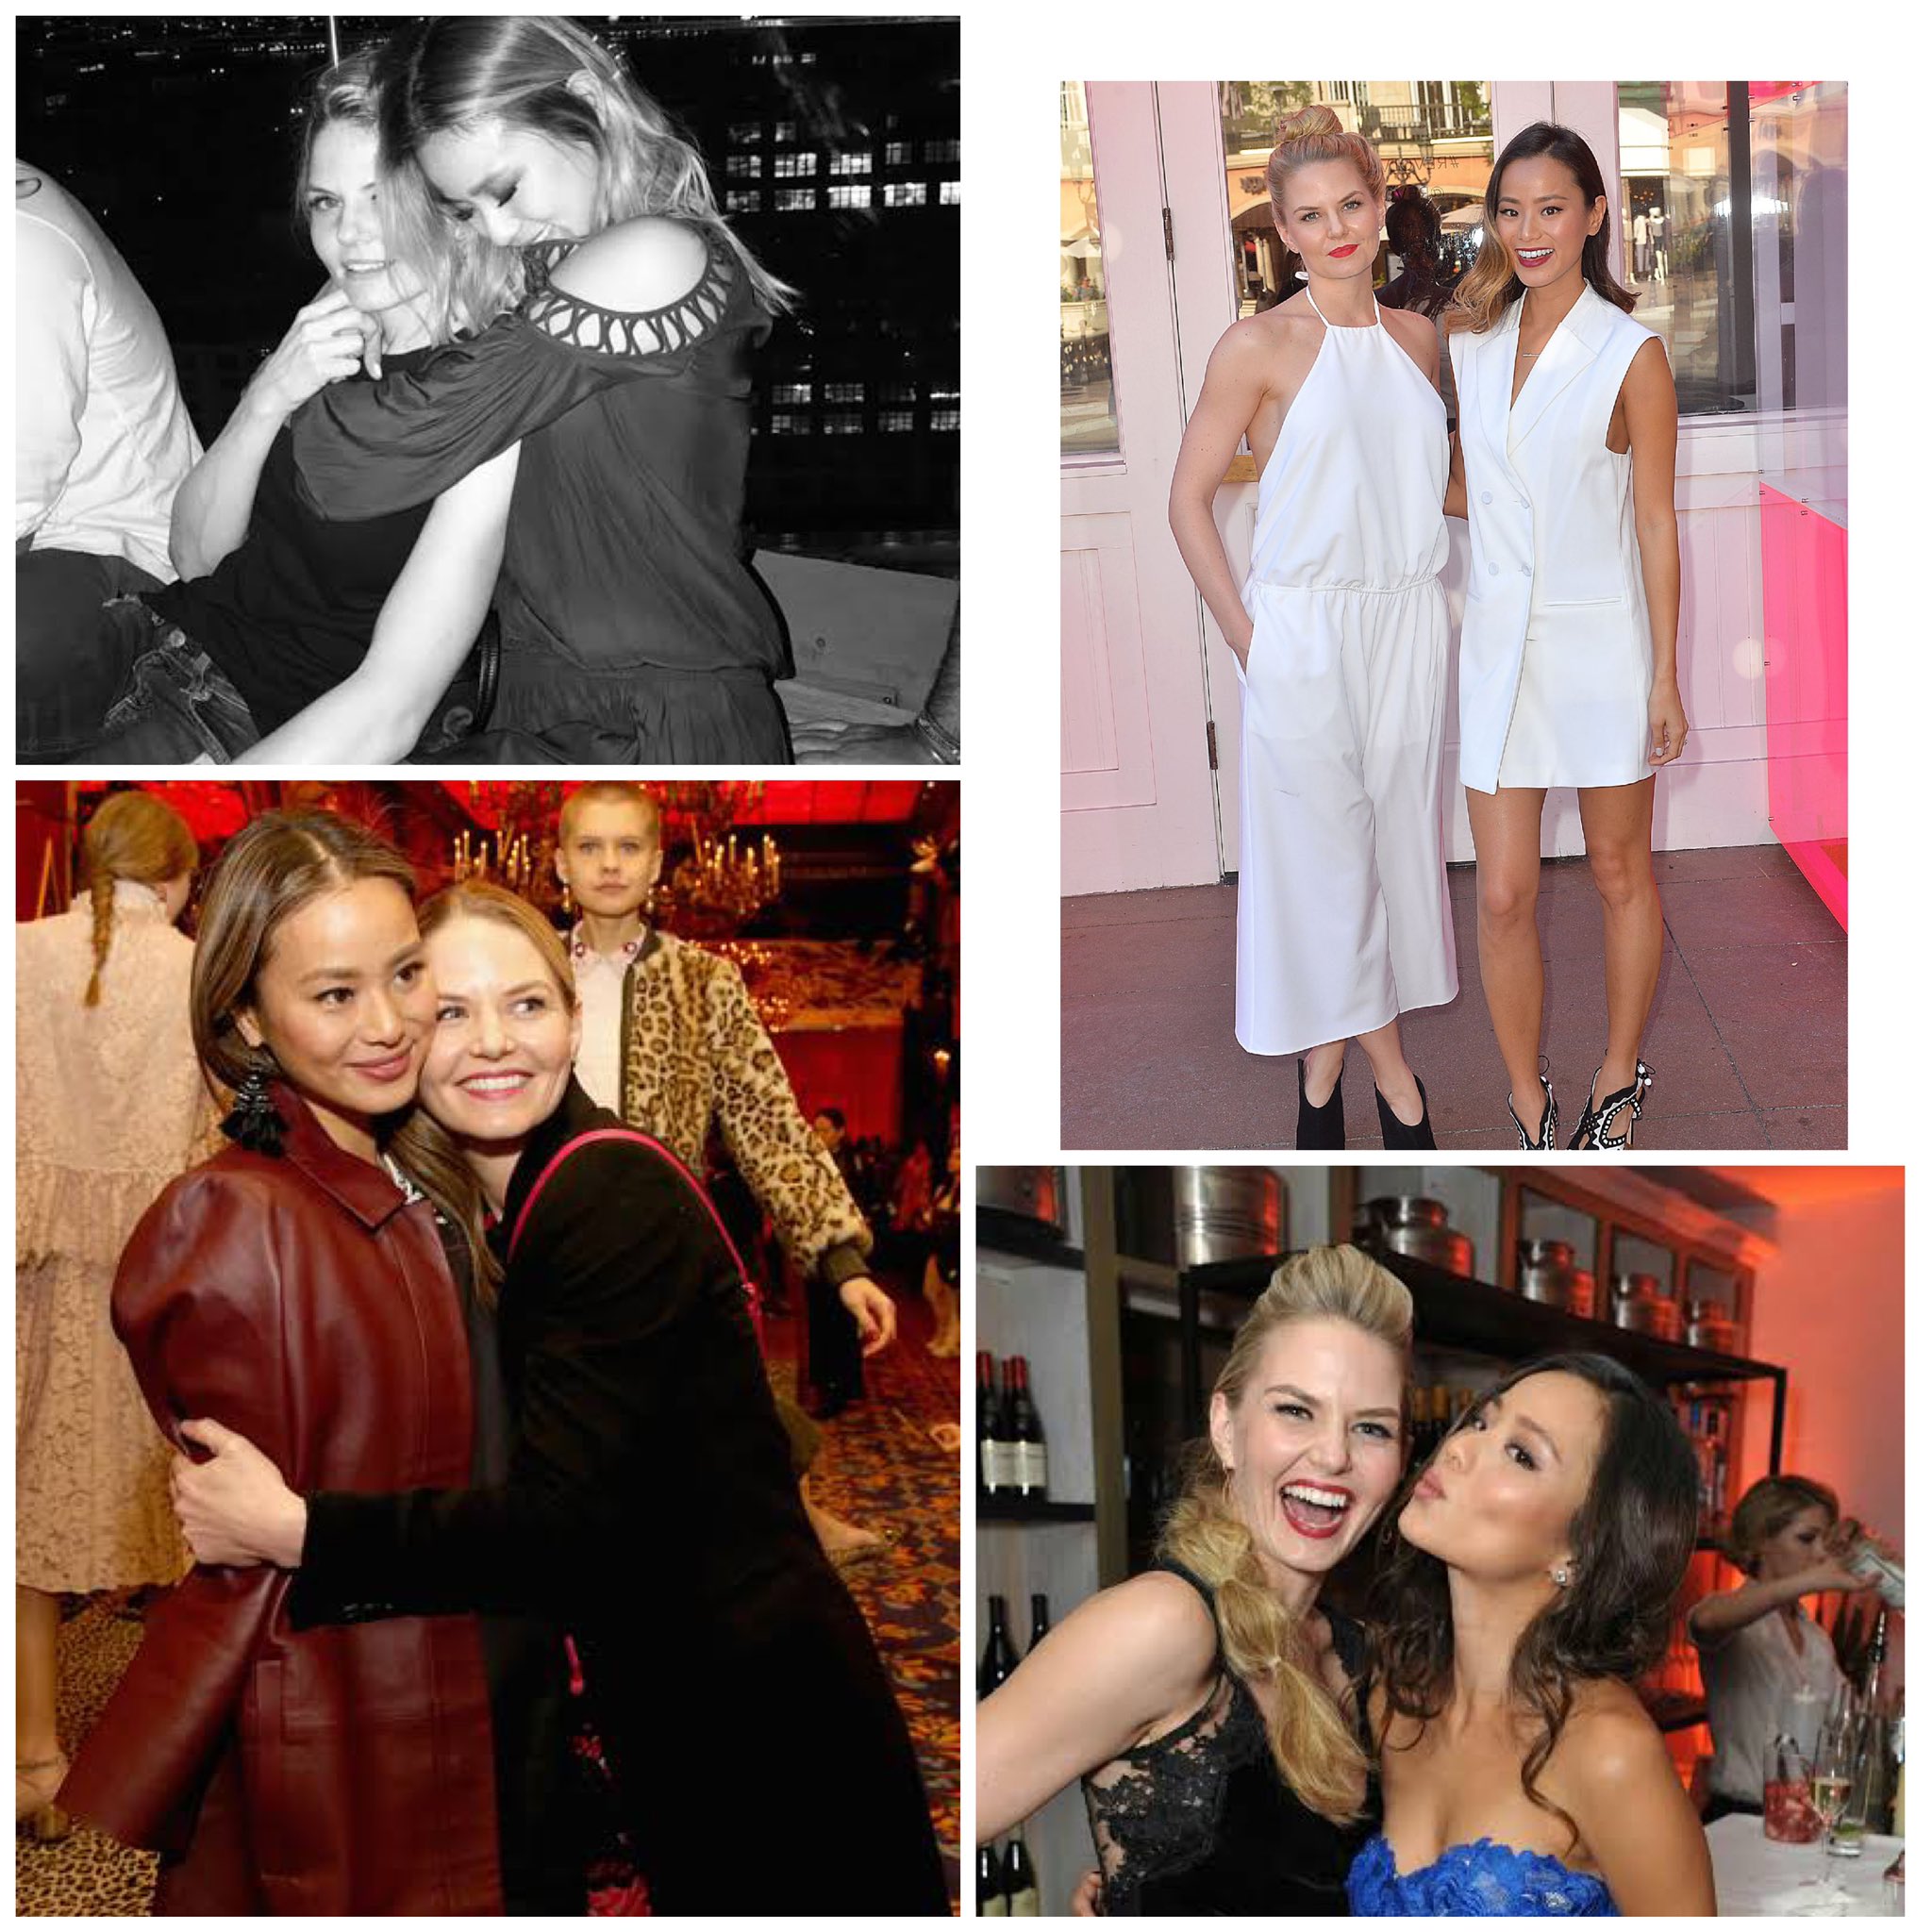 We want to wish a very very happy bday!  Jennifer Morrison and Jamie Chung 